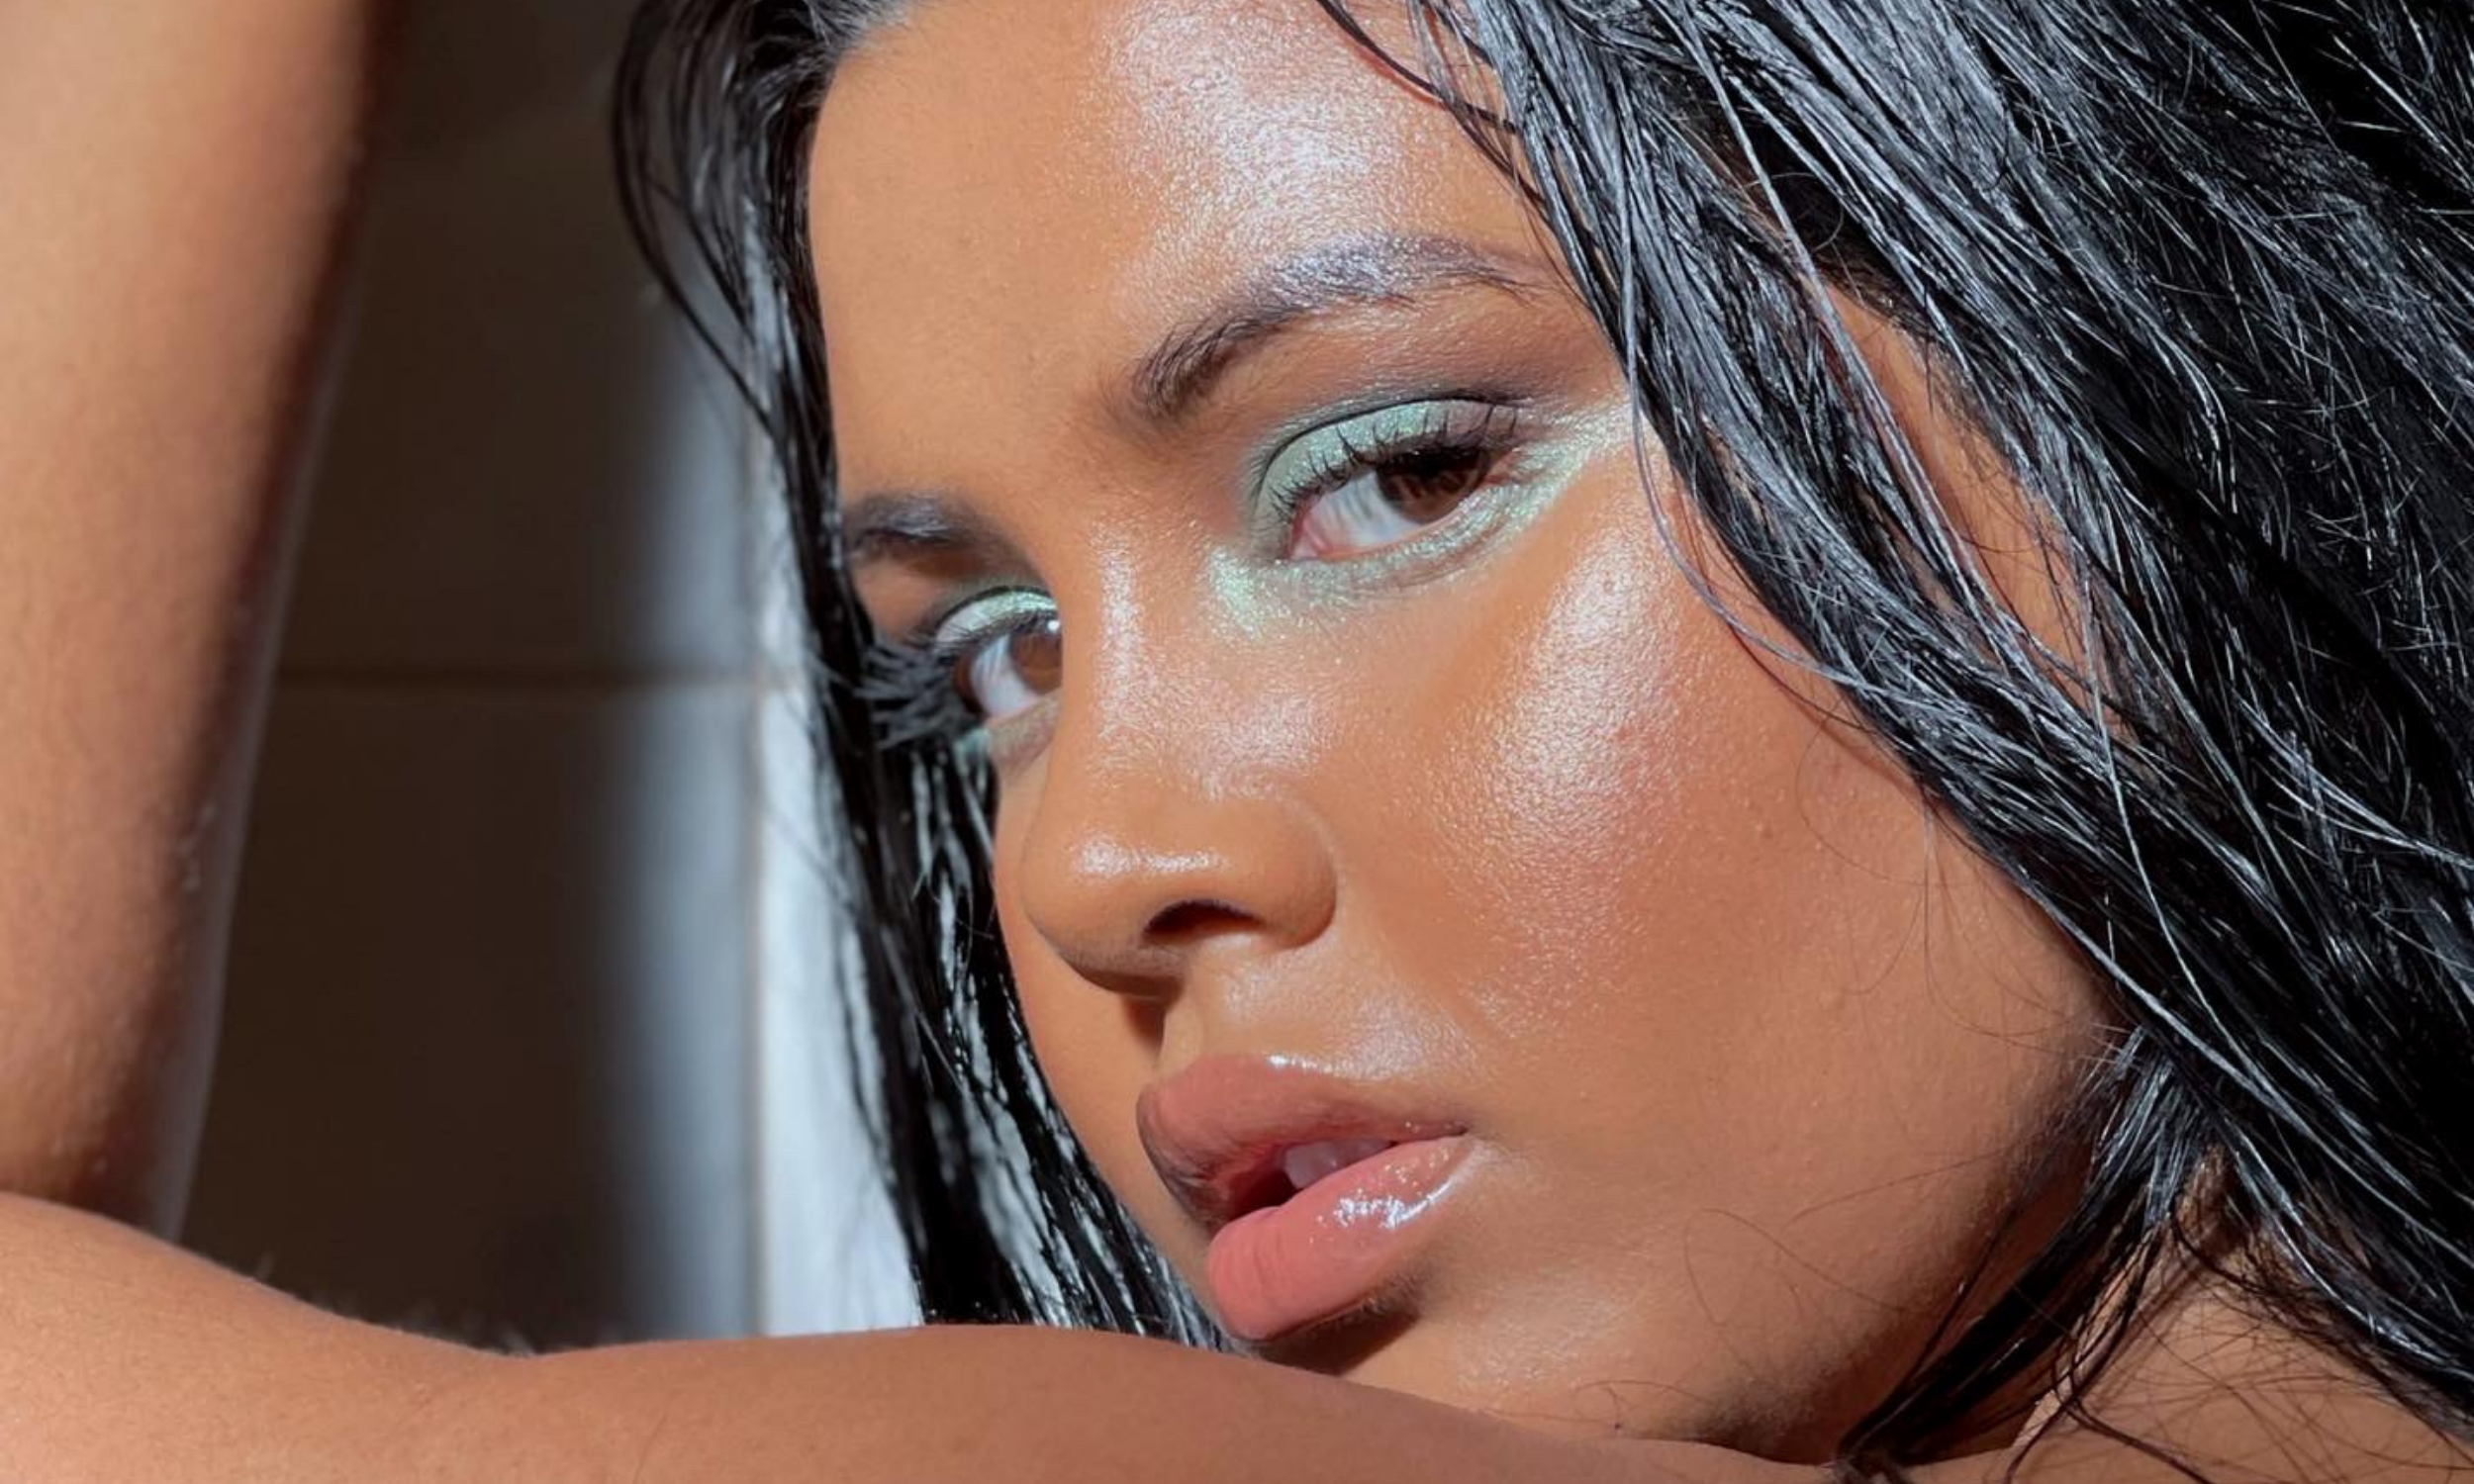 Ruchie Page wearing Ultra Violette SPF and blue eyeshadow makeup.